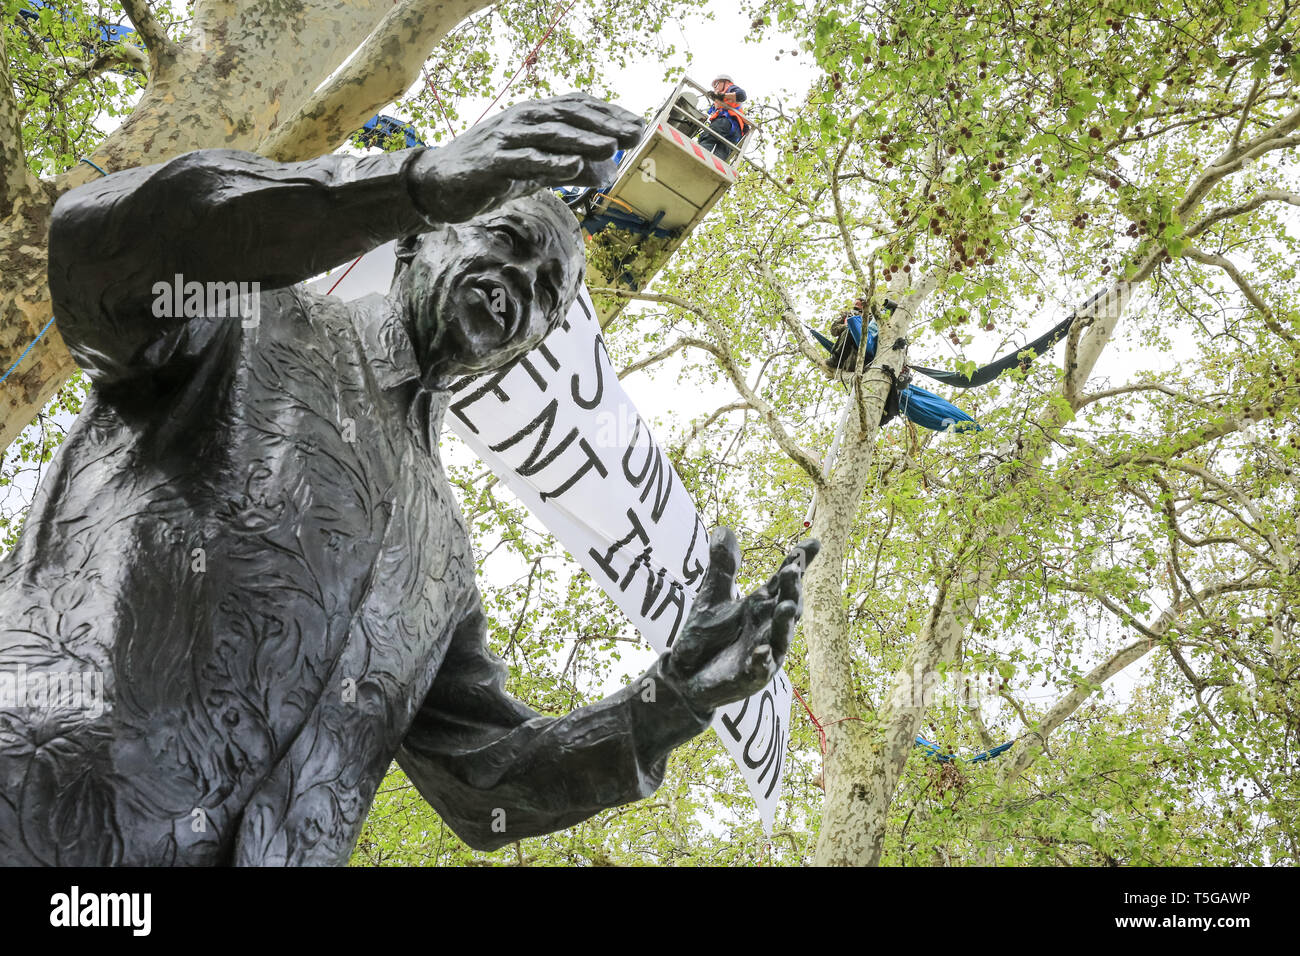 Westminster, London, UK, 24th April 2019. Police attempt to remove Extinction Rebellion and climate change protesters who have been camping high up in a tree on Parliament Square for several days. Nelson Mandela statue in the foreground. Credit: Imageplotter/Alamy Live News Stock Photo